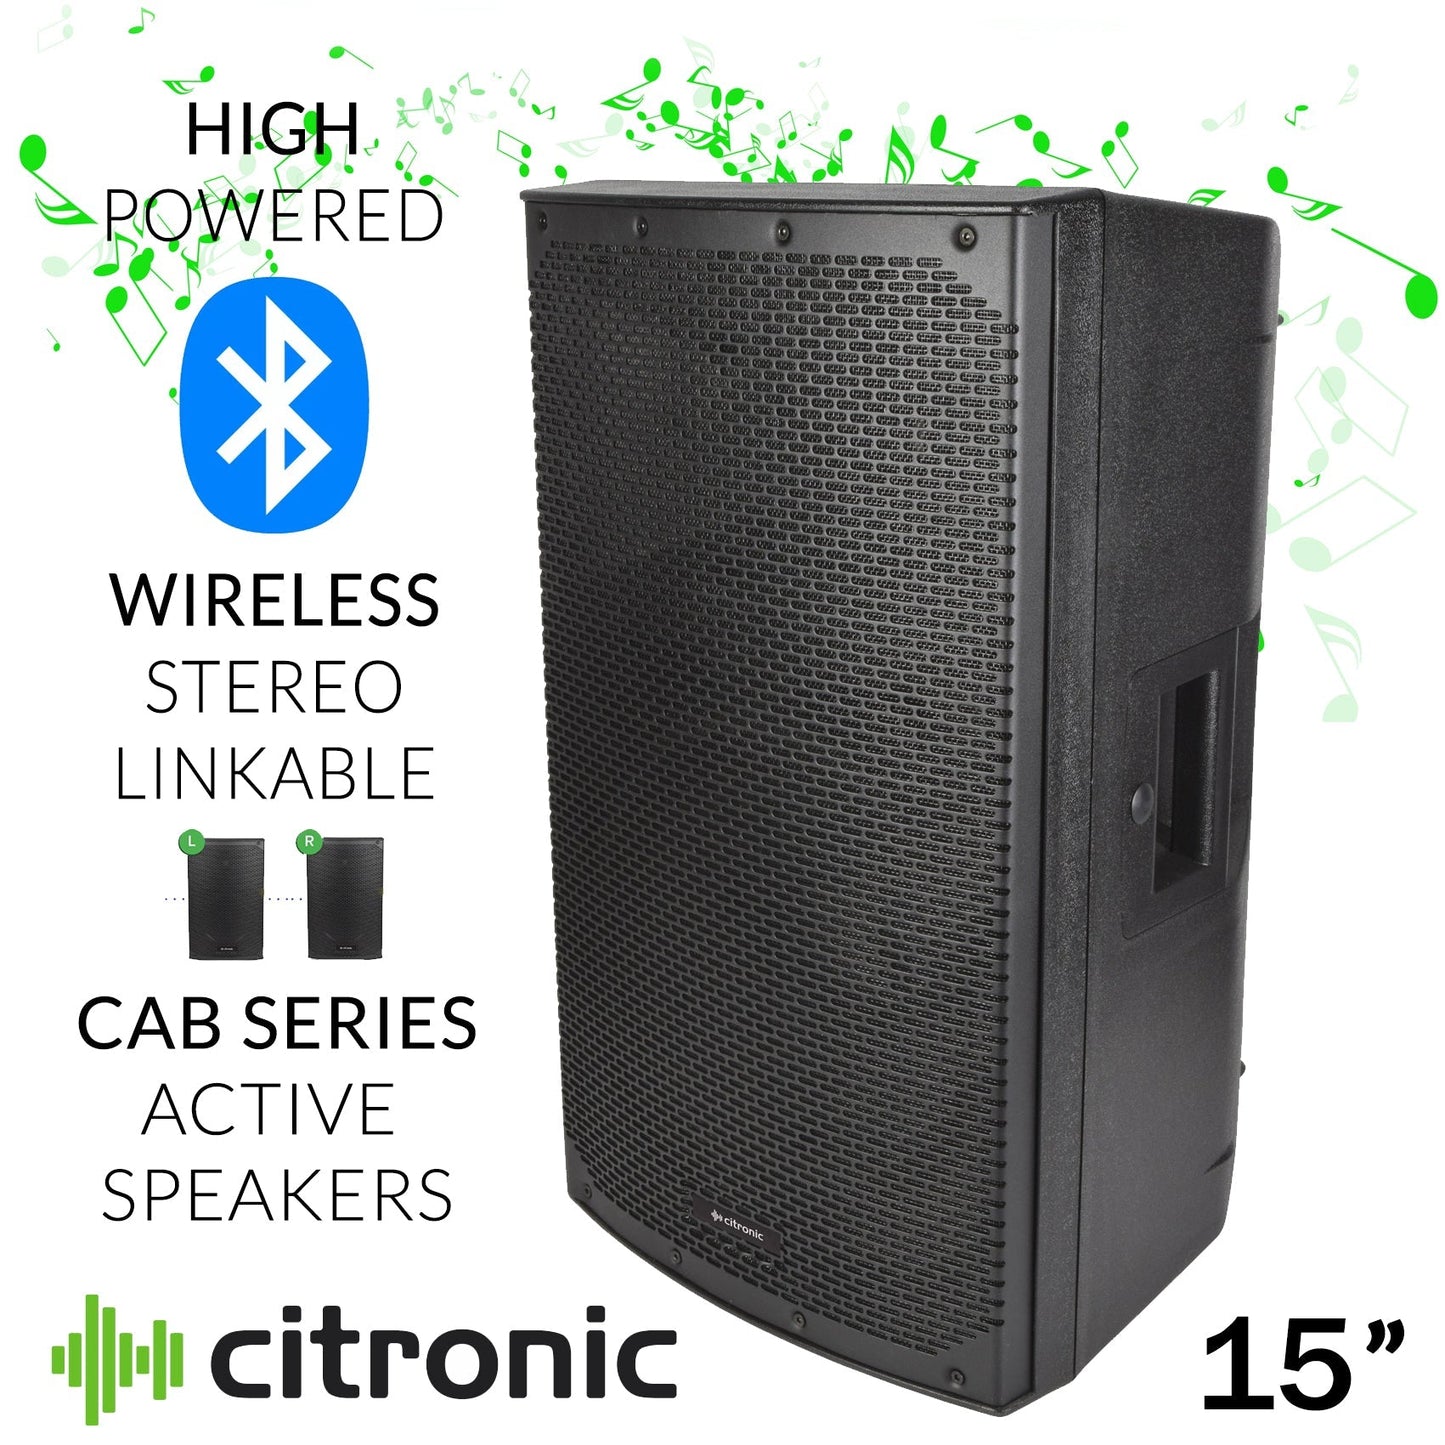 Citronic 15 inch Bluetooth Stereo Linkable PA Powerful Loud Active Digital Amp Mixer Speaker